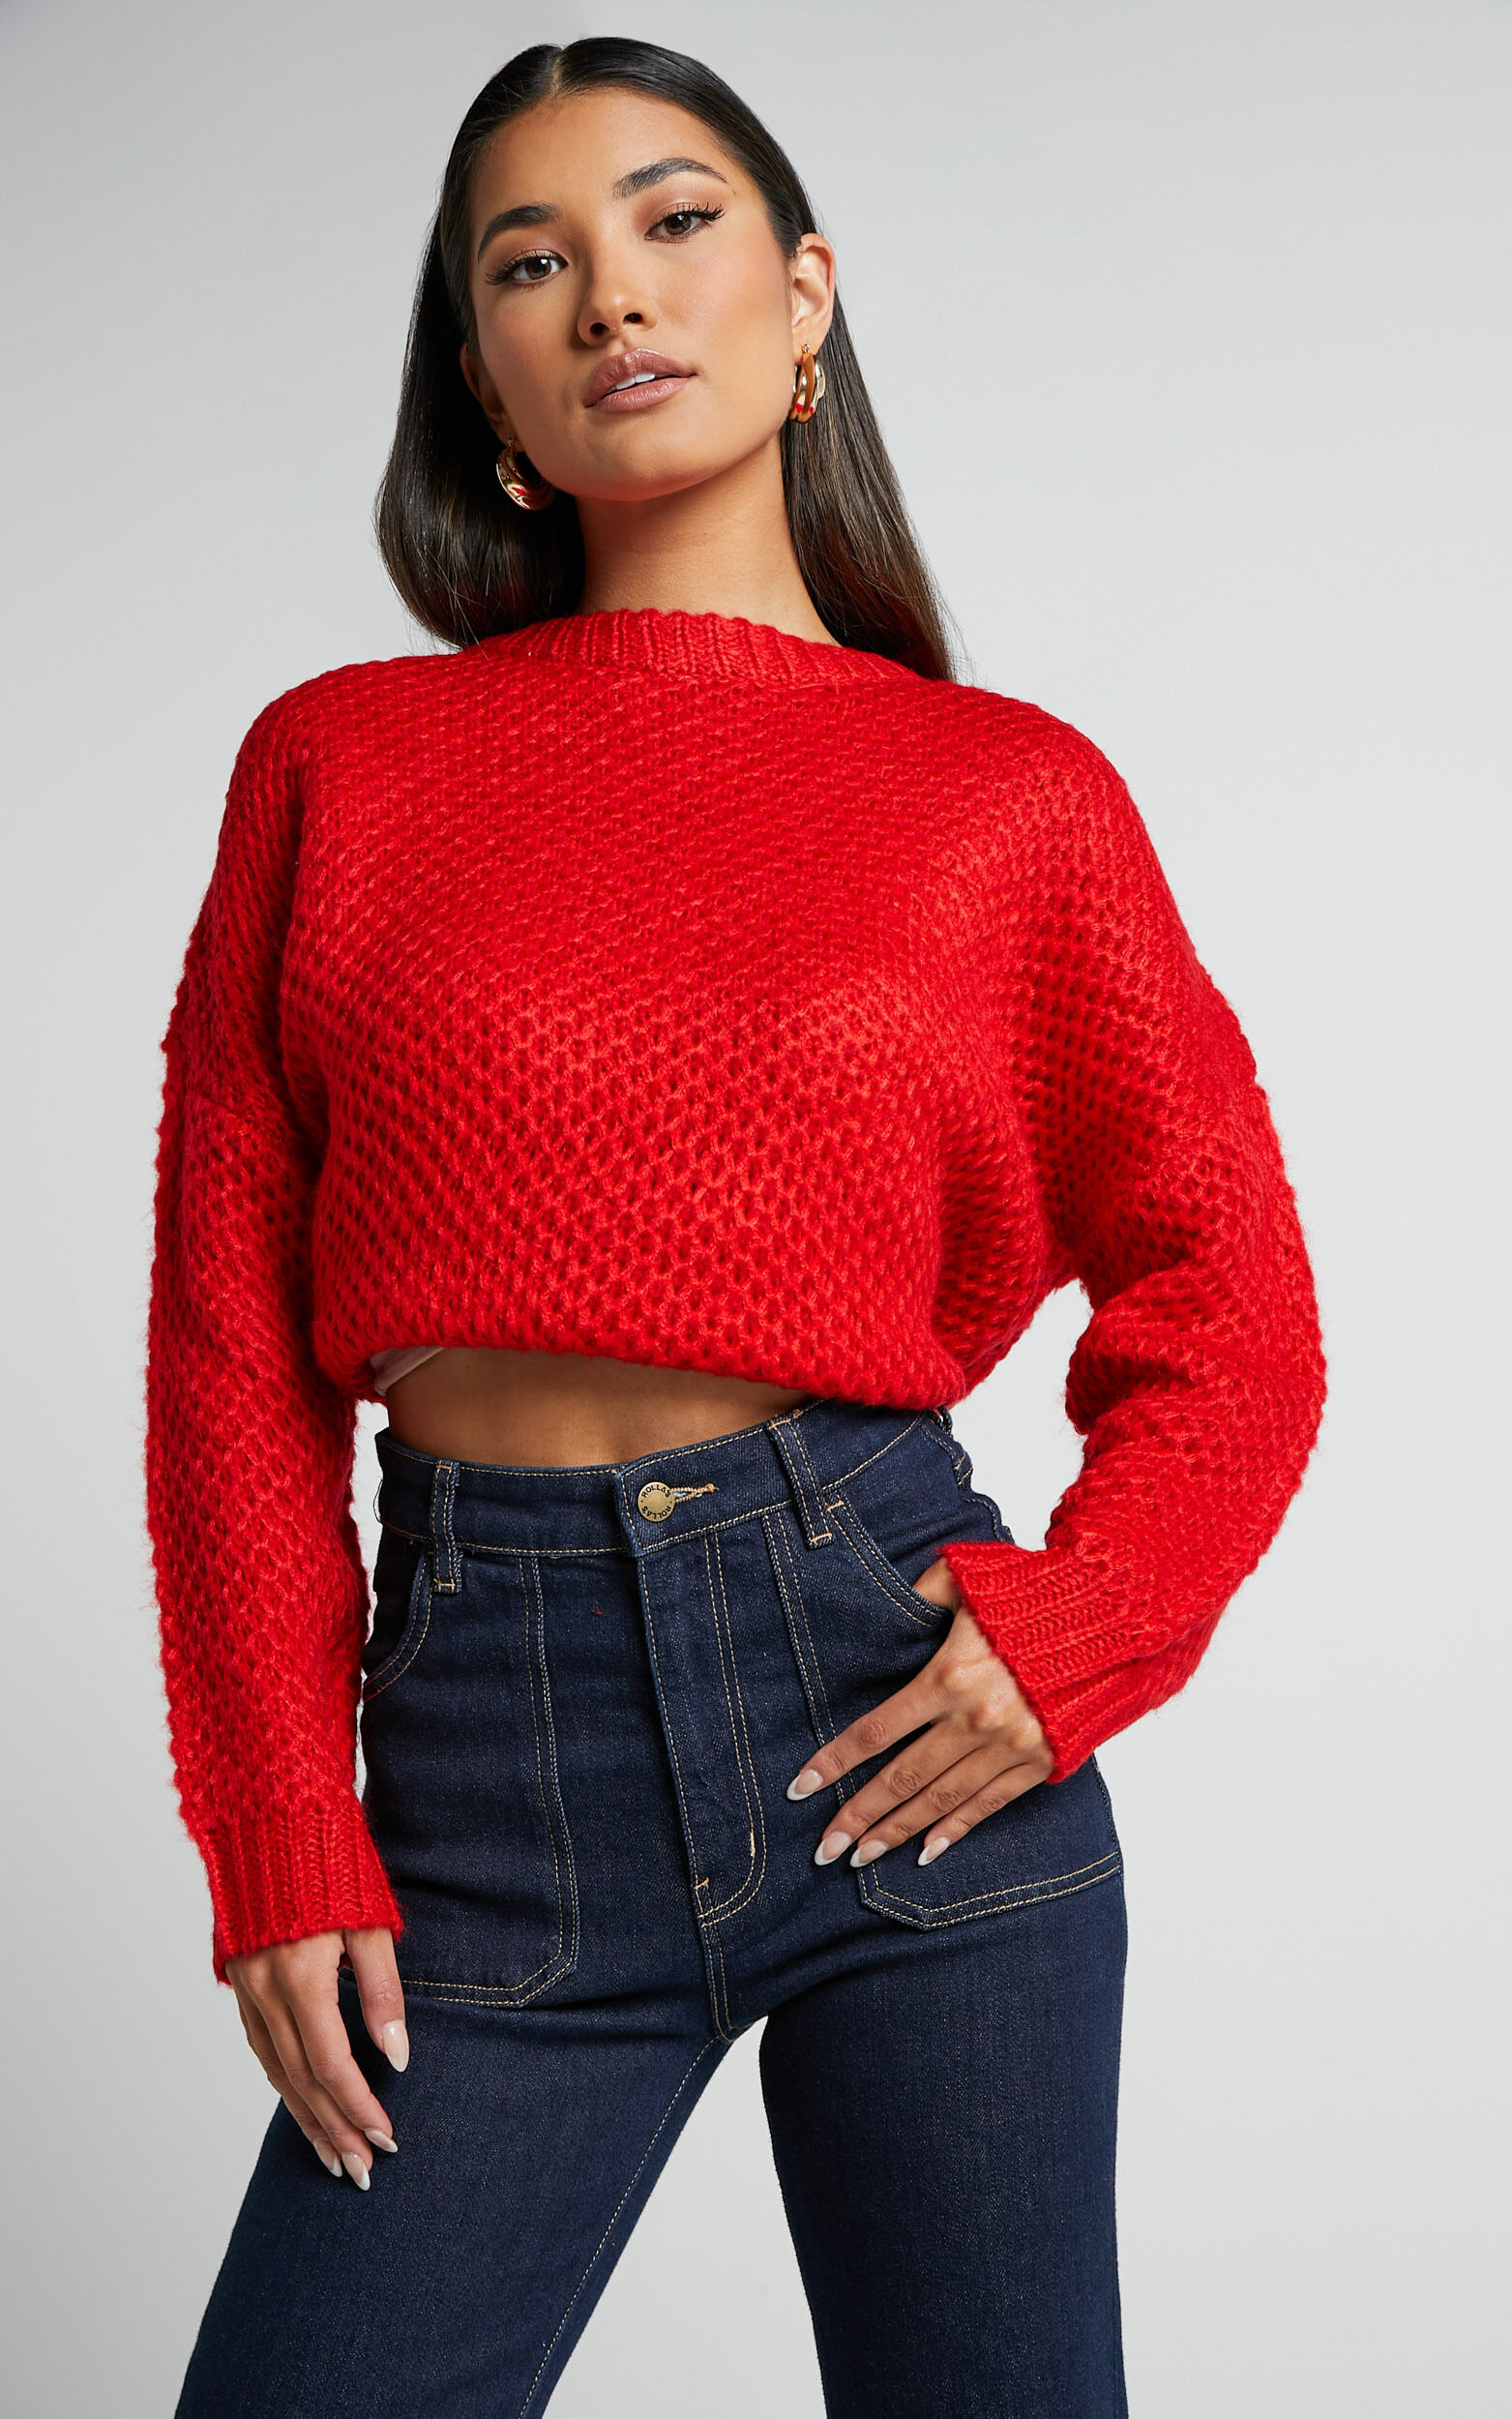 Snuggle Up Jumper - Knit Jumper in Red - S/M, RED1